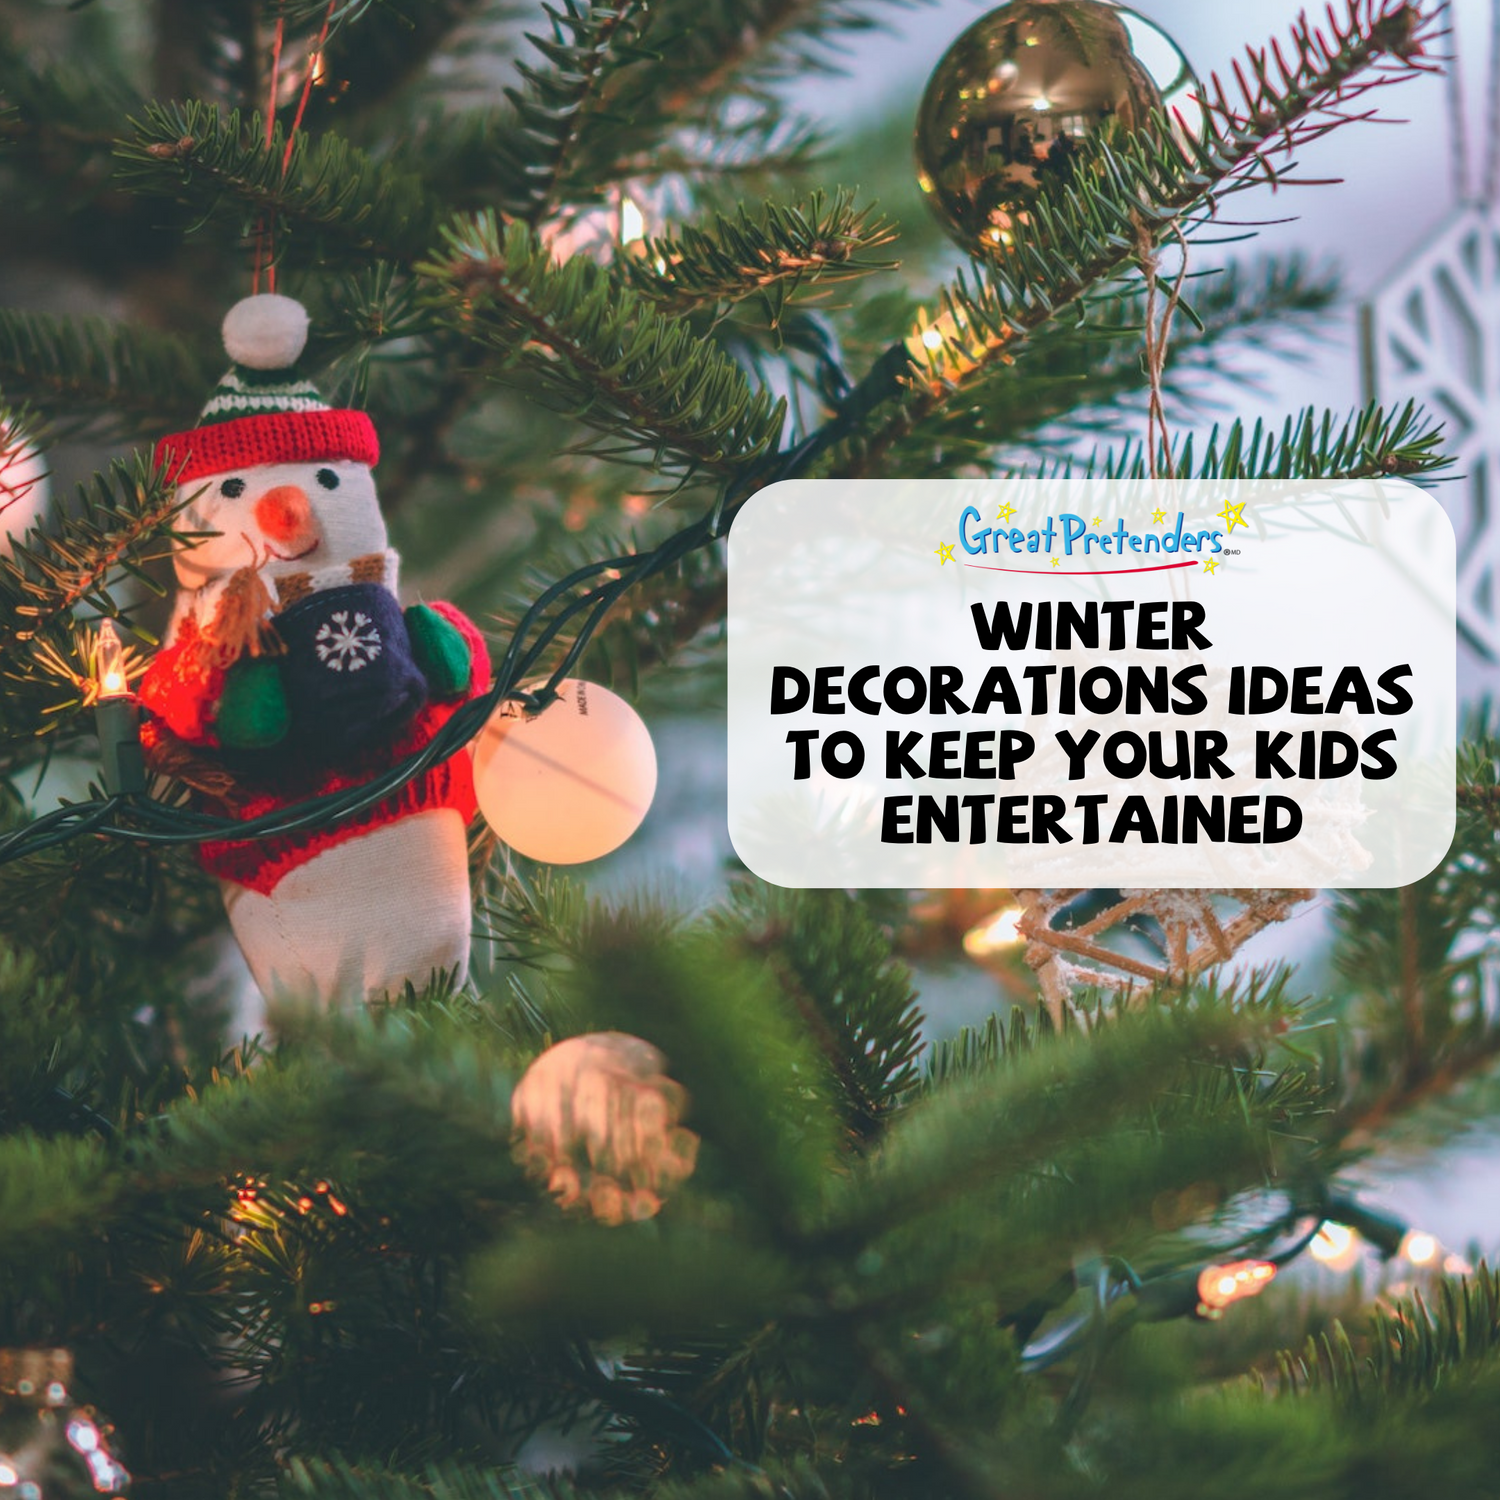 Winter decorations ideas that Will Keep Your Kids Entertained